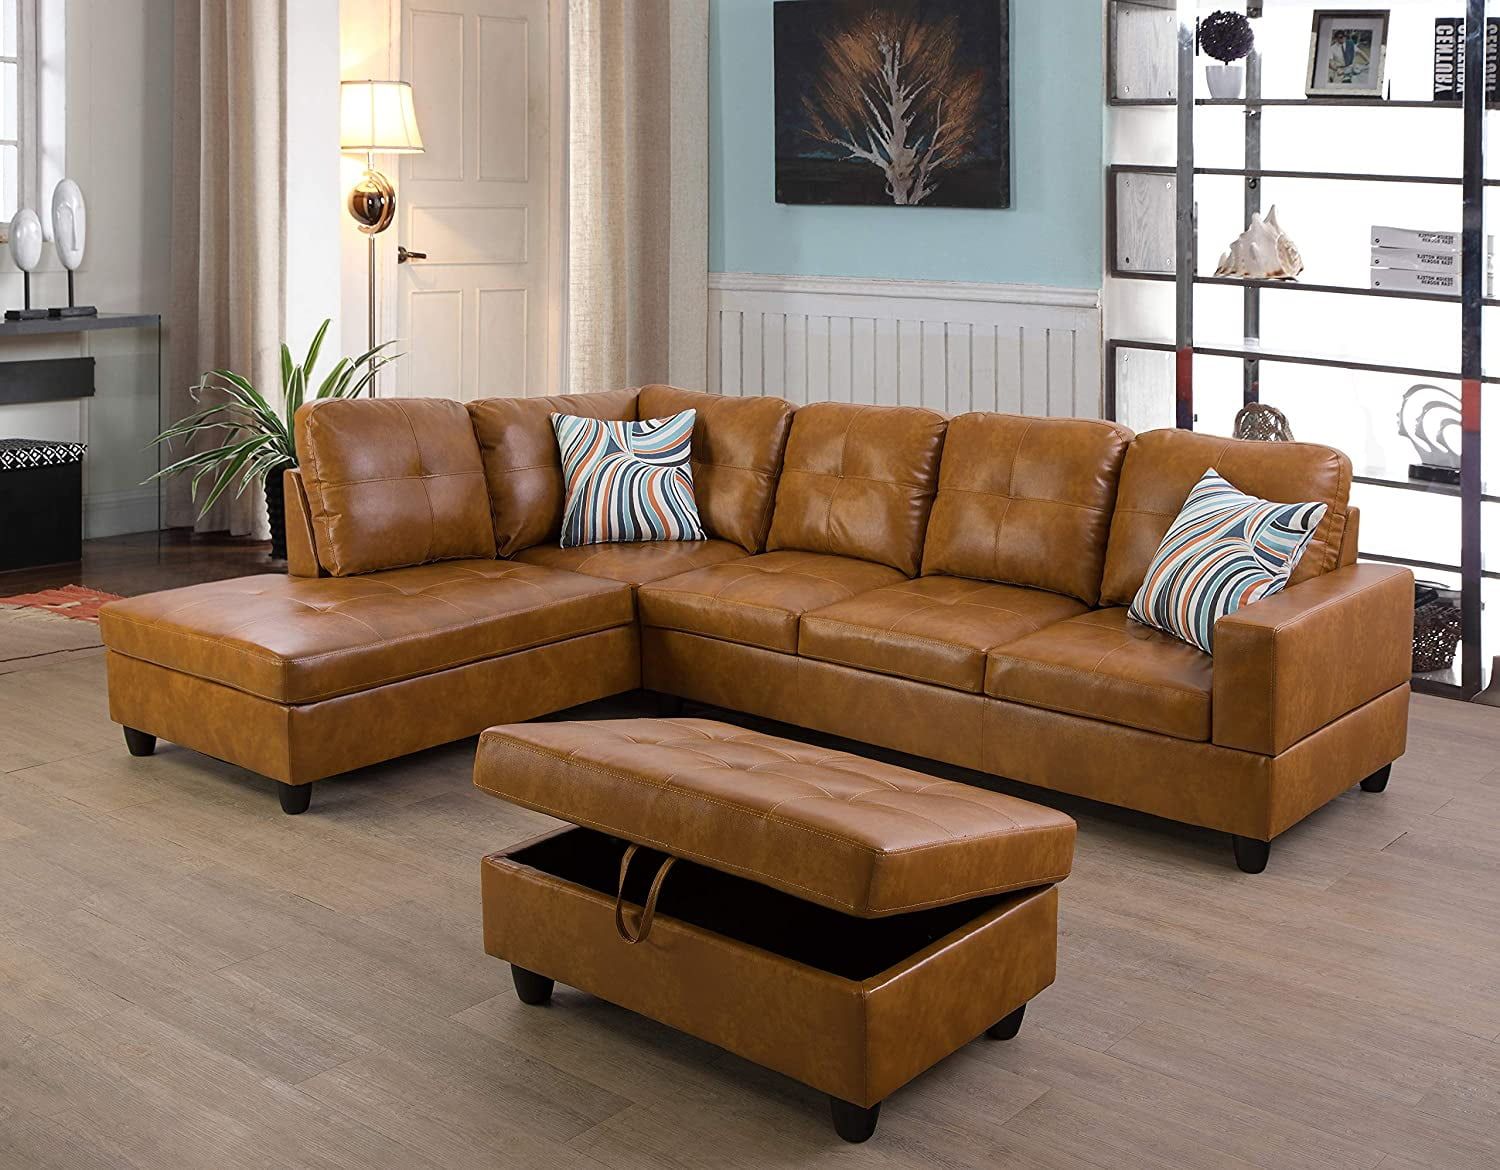 Ainehome Furniture Faux Leather Sectional Sofa Set, Cote Divoire | Ubuy Throughout Faux Leather Sectional Sofa Sets (View 14 of 15)